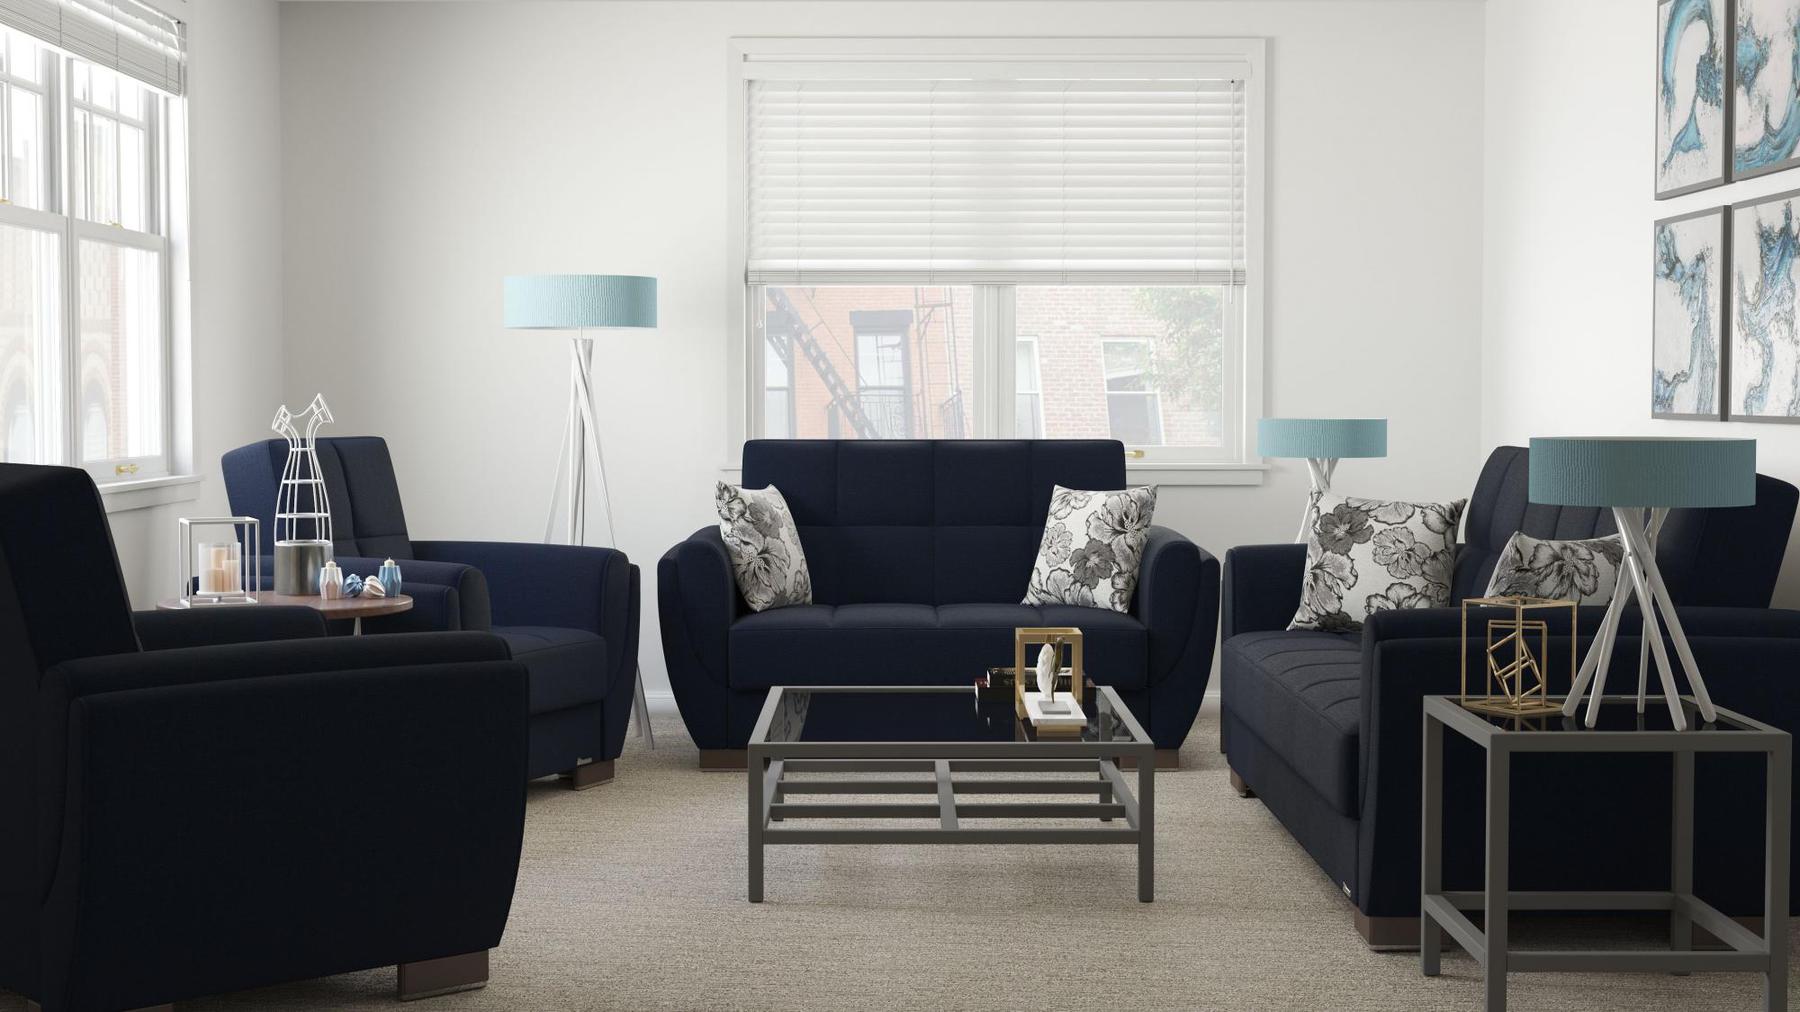 Modern design, Black Blue Denim , Chenille upholstered convertible sleeper Sofabed with underseat storage from Voyage Shelter by Ottomanson in living room lifestyle setting with the matching furniture set. This Sofabed measures 94 inches width by 36 inches depth by 41 inches height.